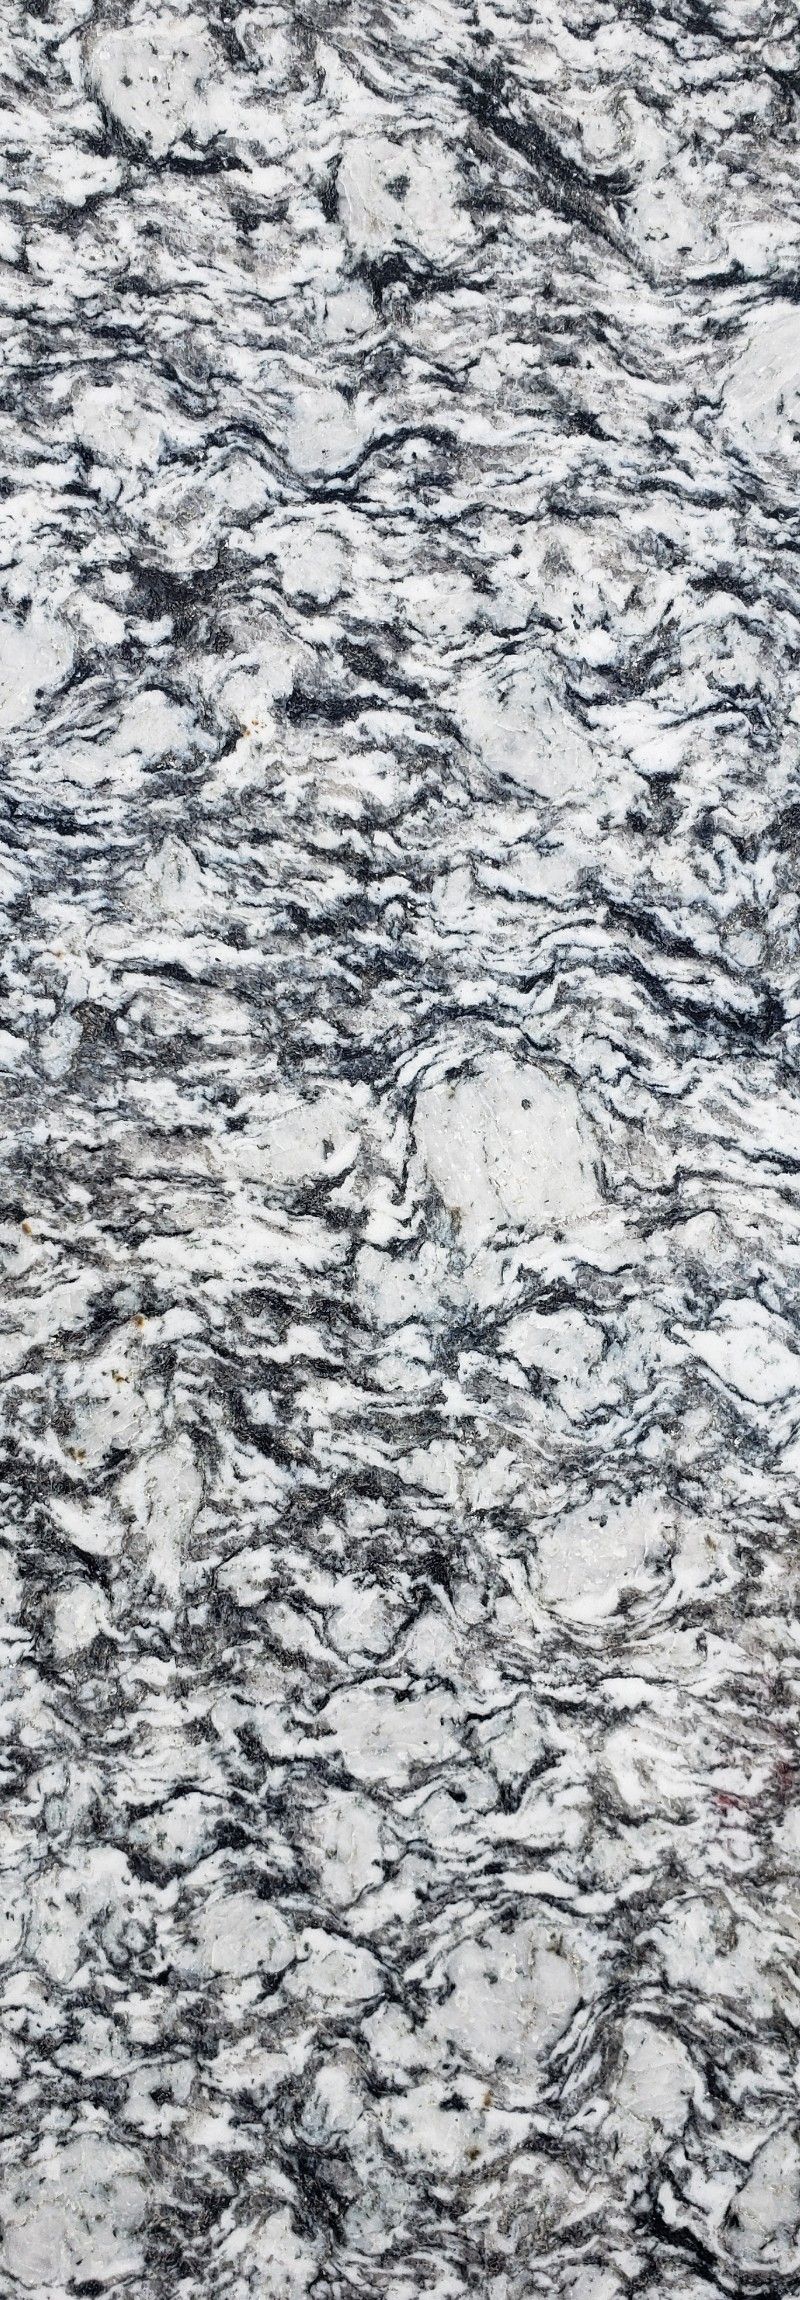 Water wave Granite 3cm/1.25" inch thick